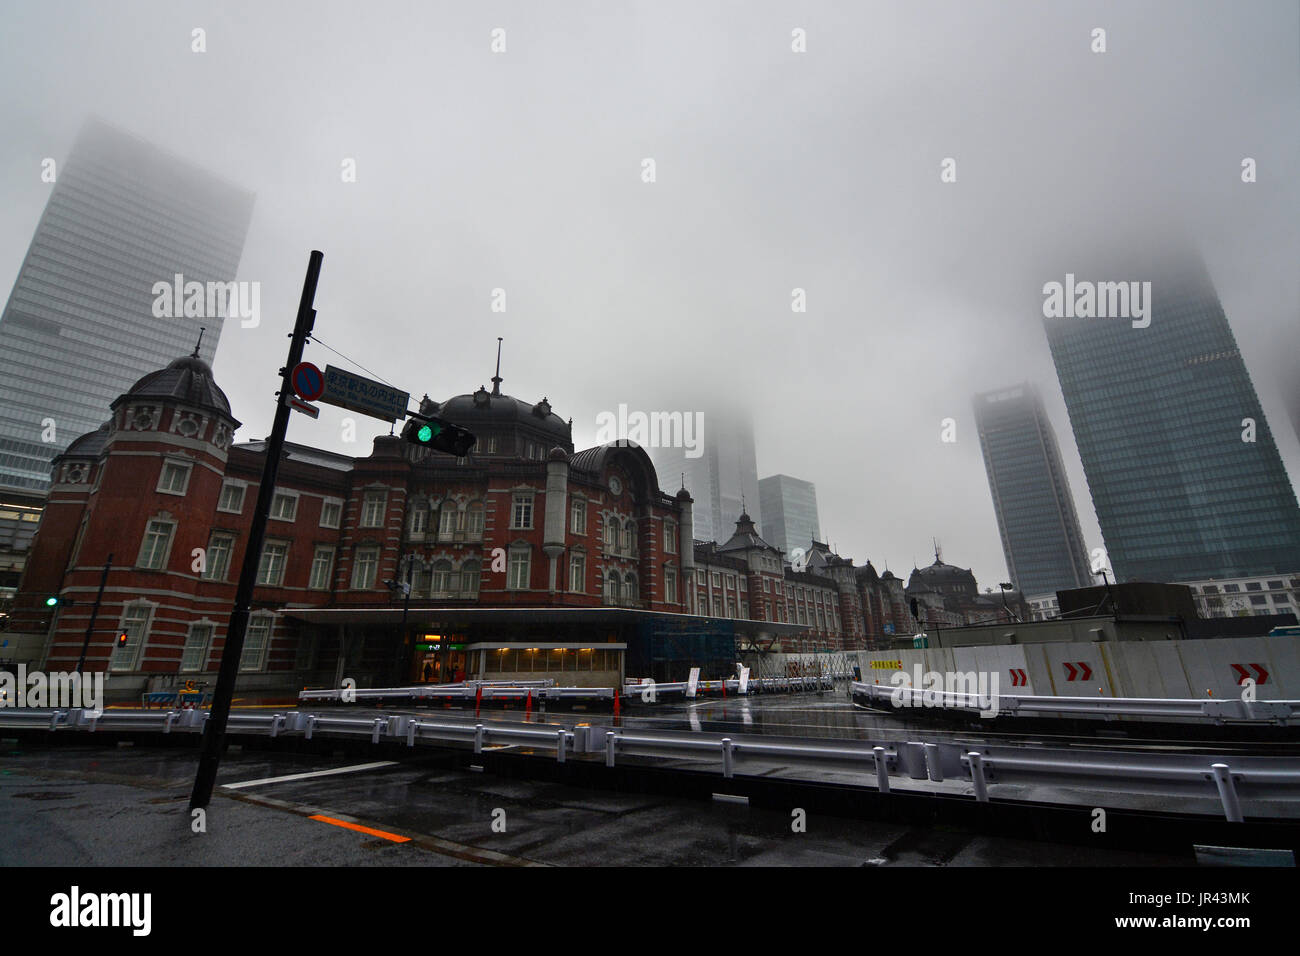 TOKYO, JAPAN - APRIL 8, 2017 - Skyscraper buildings around Tokyo Station disappear into thick morning fog in Japan's urban capital Stock Photo